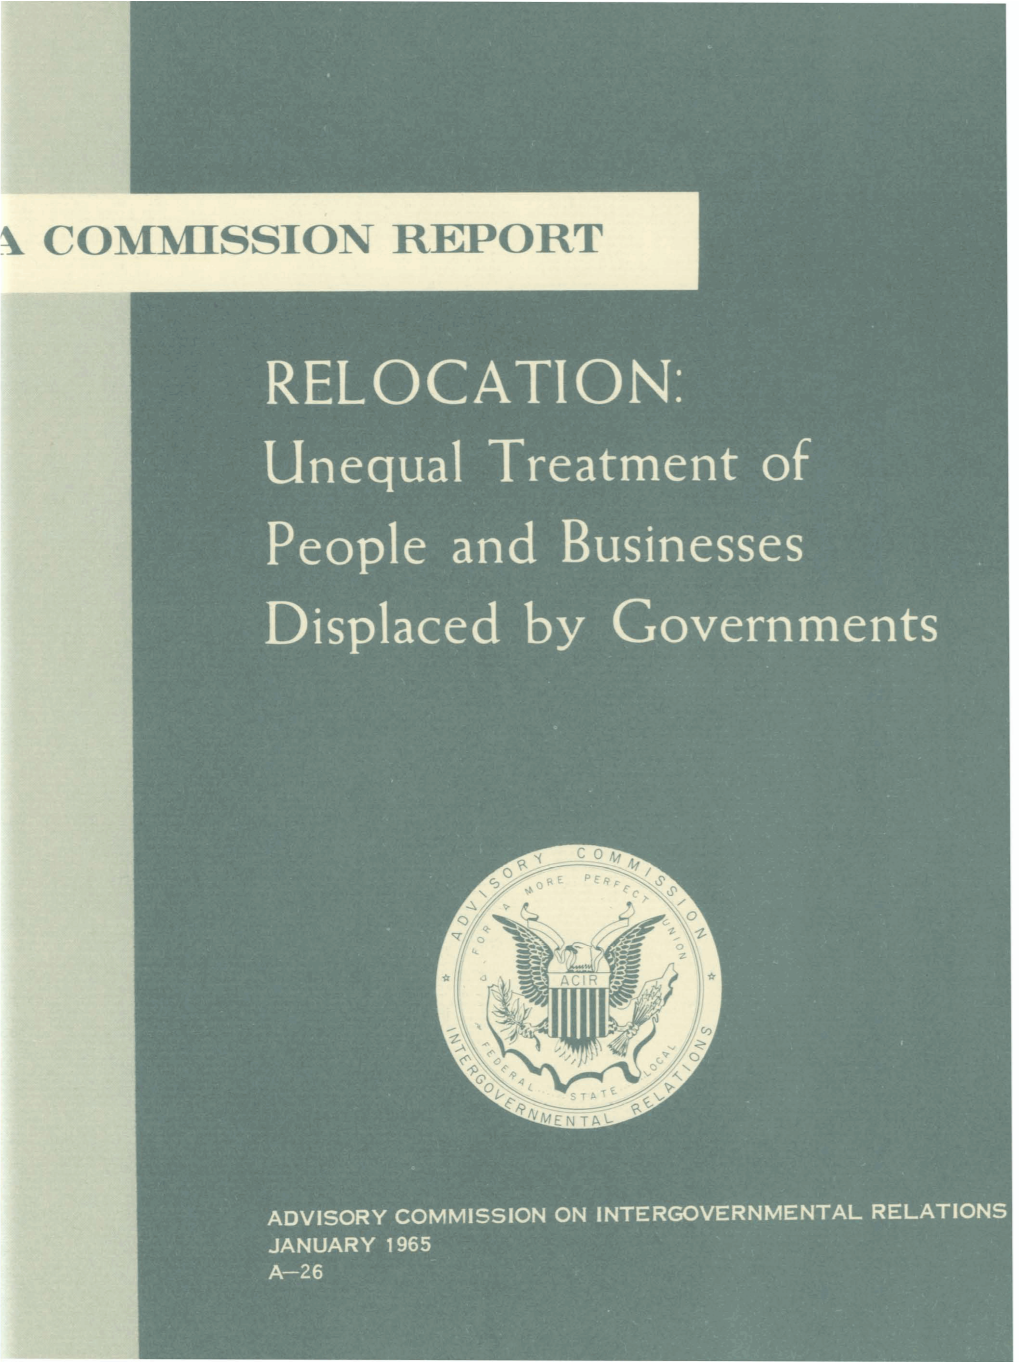 RELOCATION: Unequal Treatment of People and Businesses Displaced by Governments (A-26)